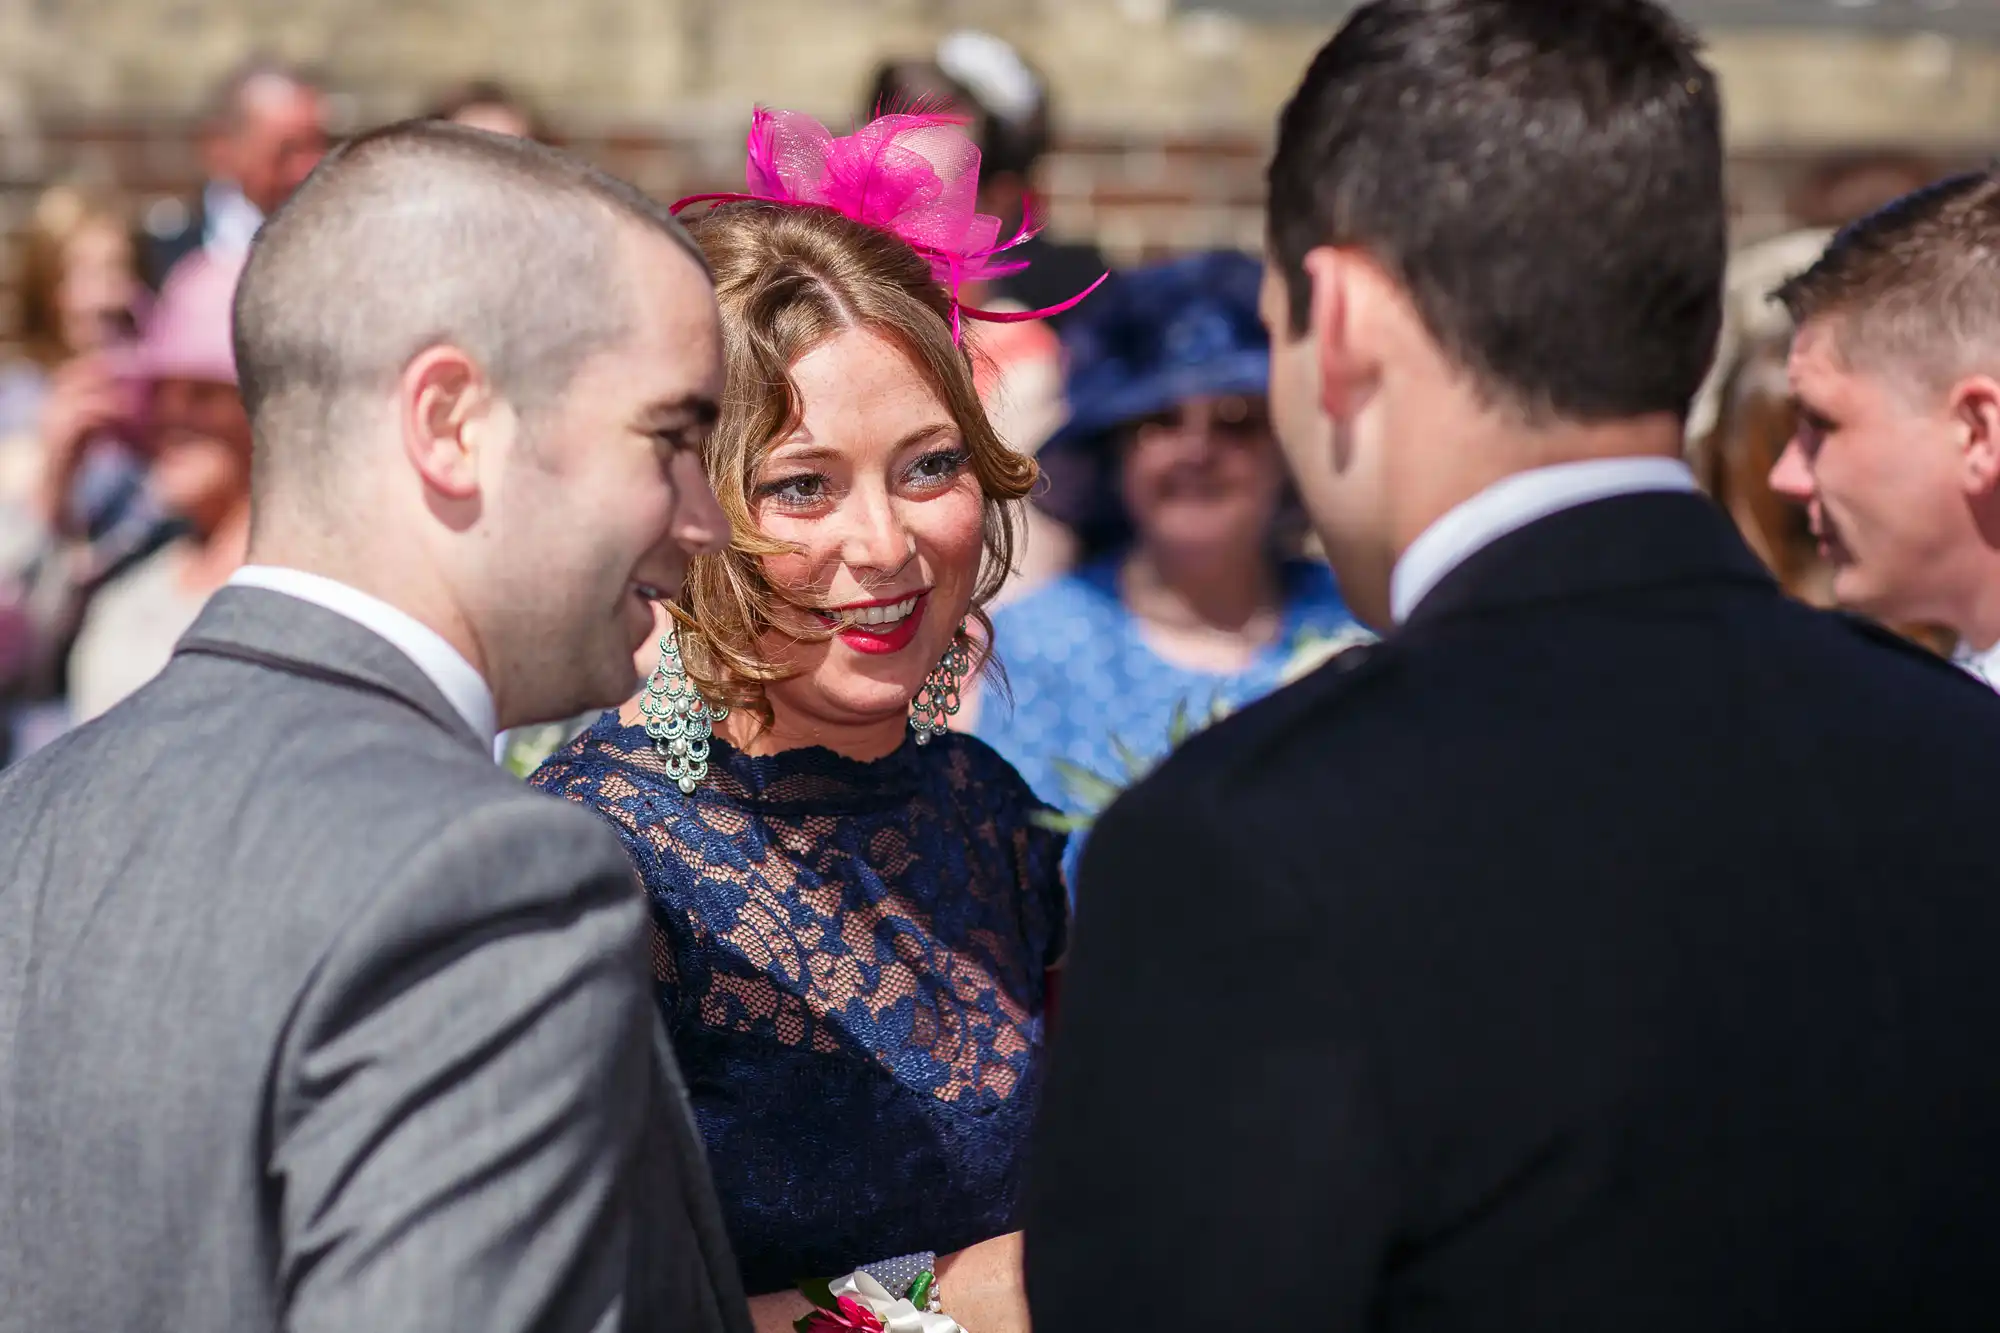 A woman in a blue lace dress and pink fascinator laughs while conversing with two men at a sunny outdoor social gathering.